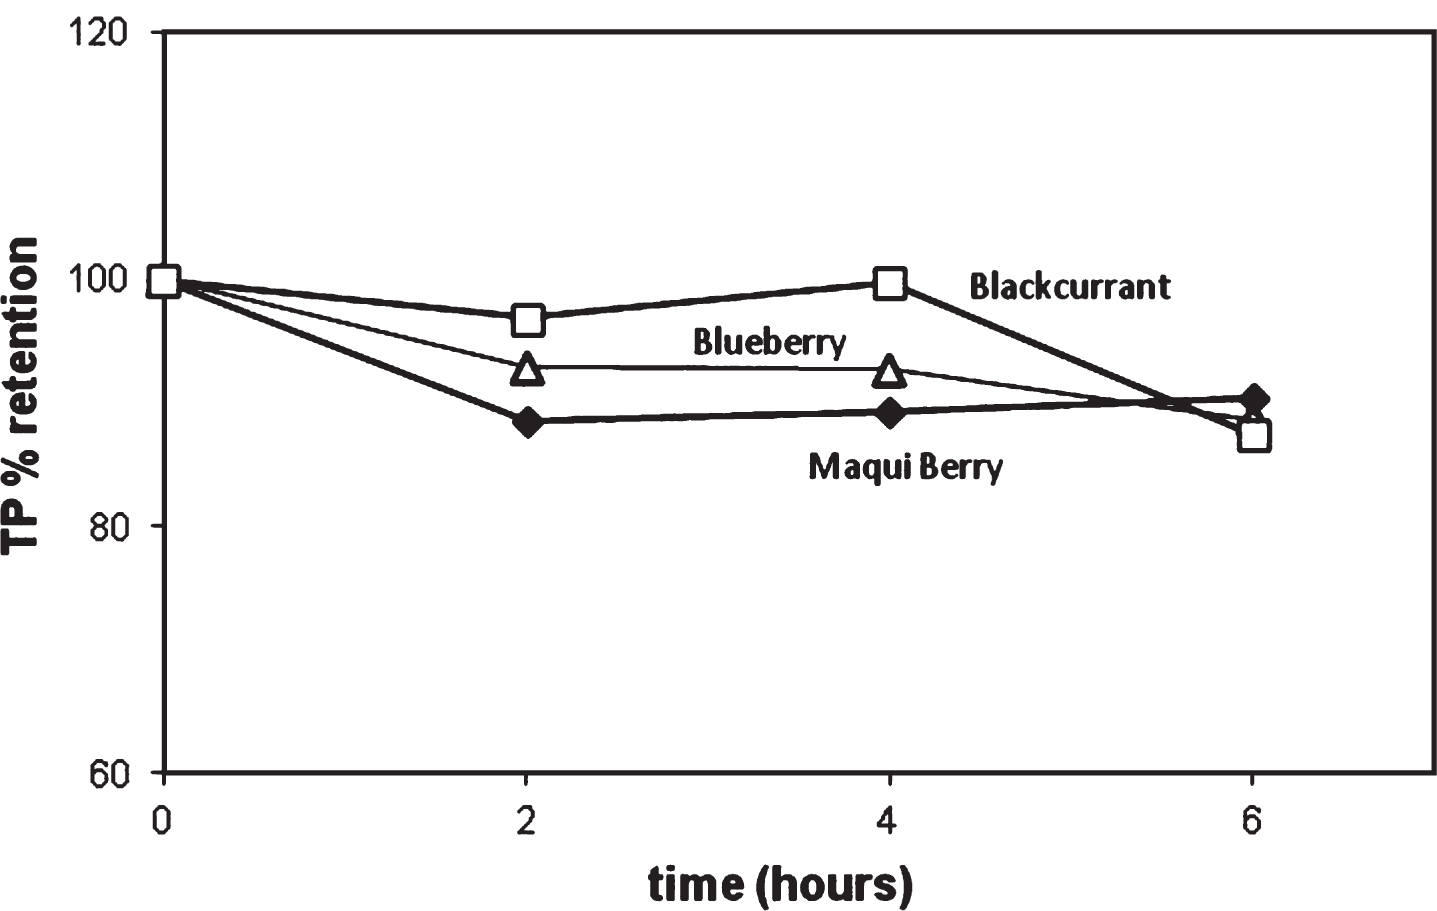 Retention of Total Phenolics in various berries as a function of heating time at 90°C